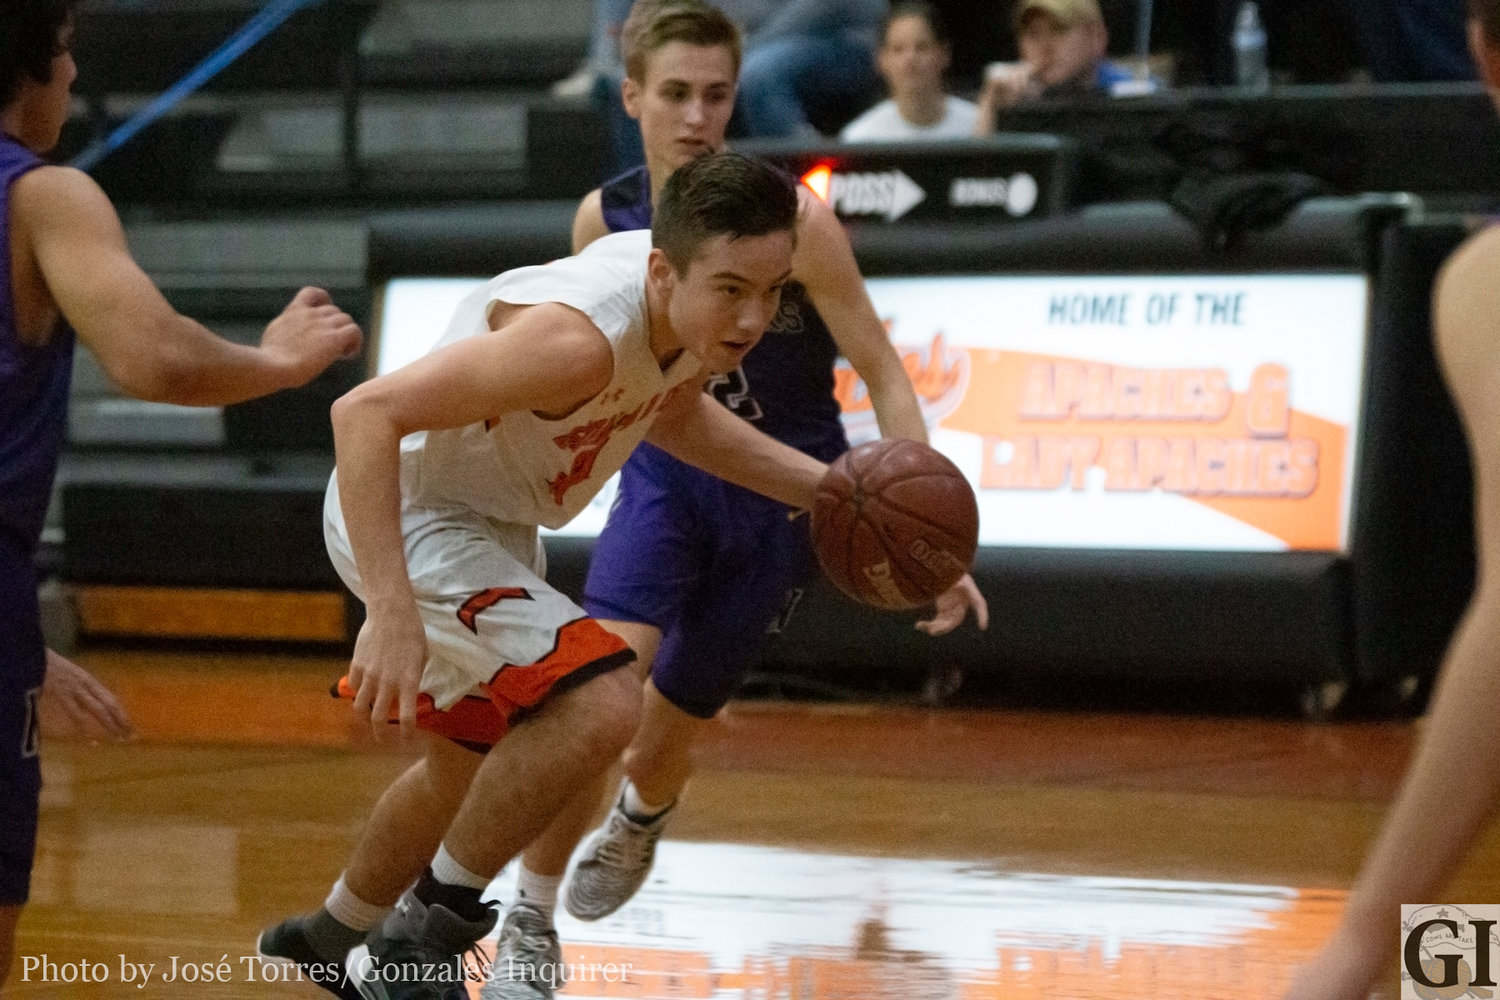 William Knox (4) led the team in scoring with 15 points. He added six rebounds, one assist and a team-leading three steals to his stat line in Gonzales’ 61-43 loss last Friday, Dec. 21.